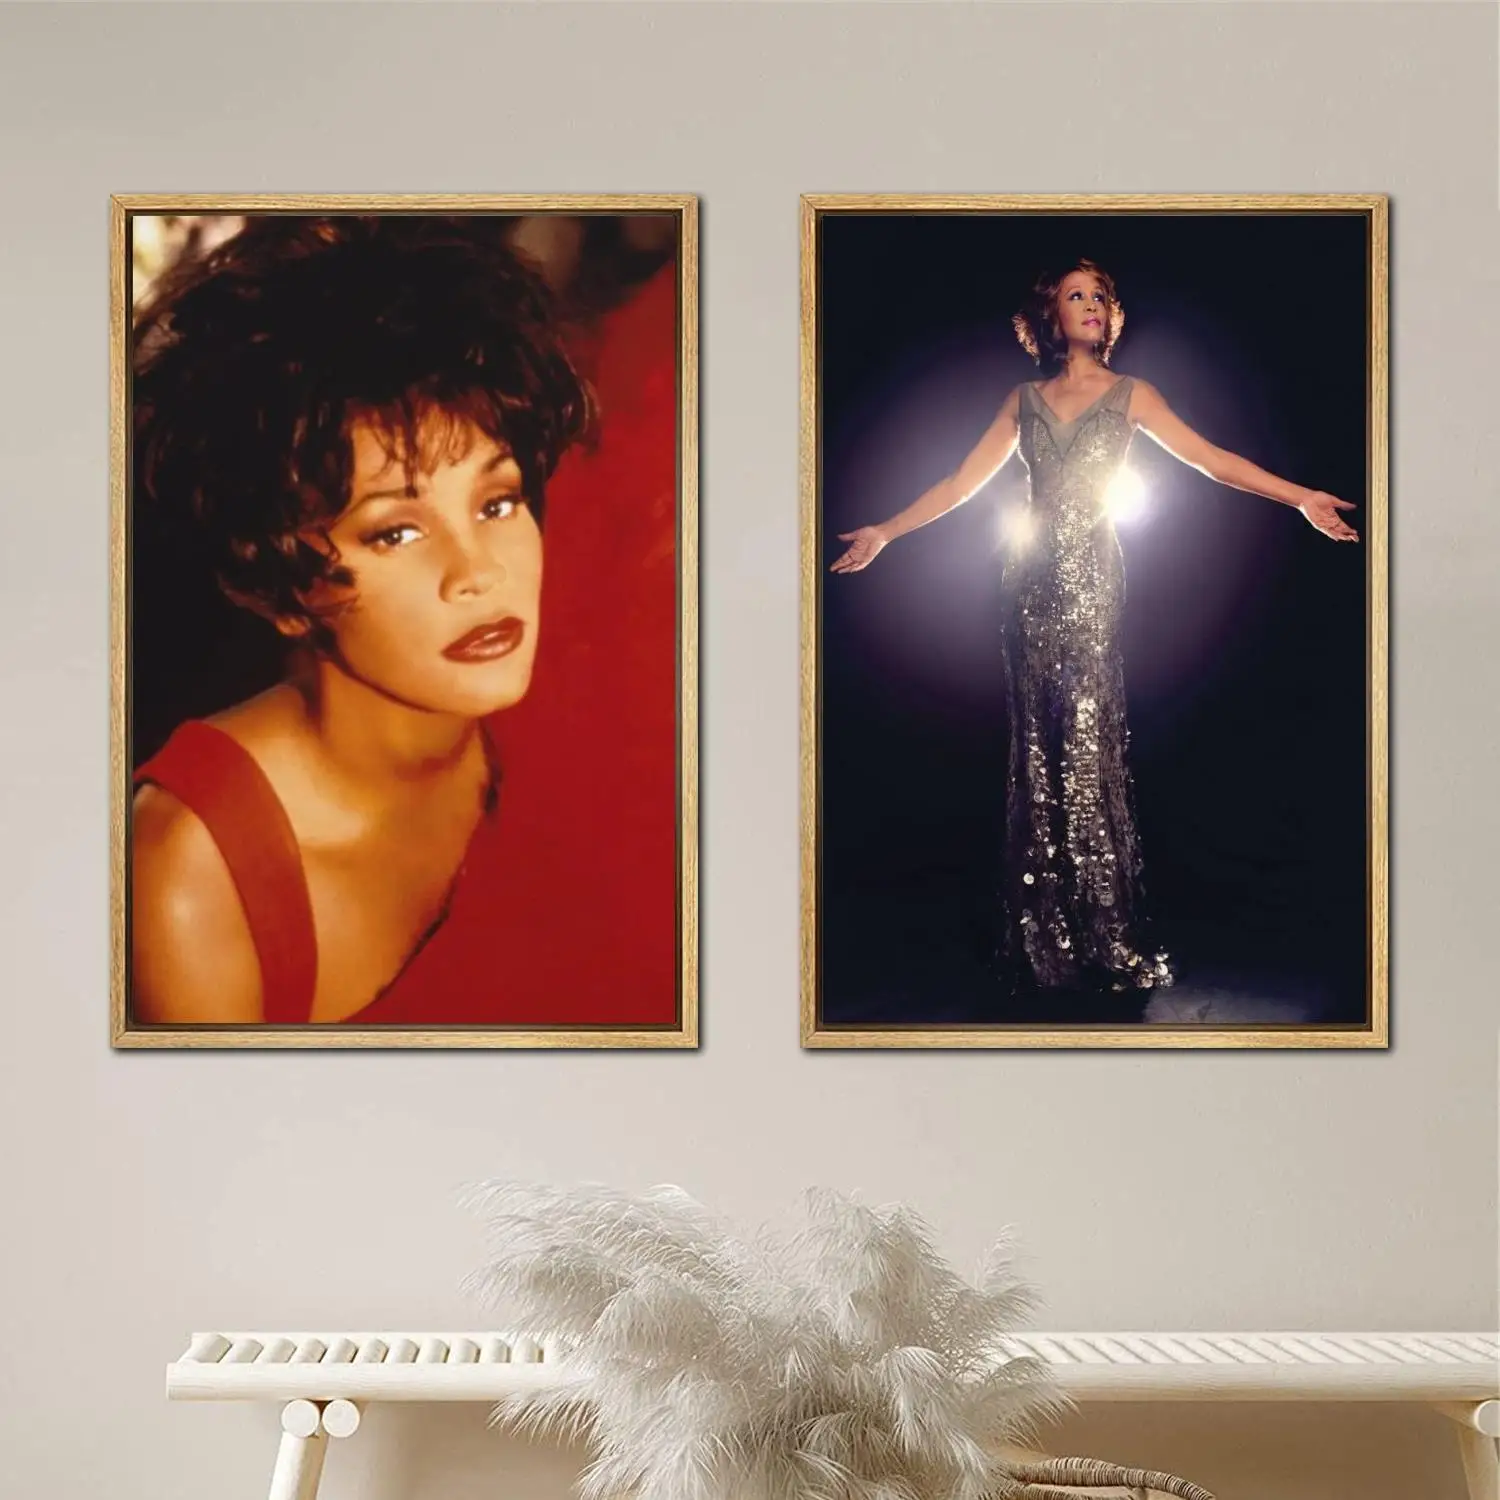 Thelma Houston Poster Painting 24x36 Wall Art Canvas Posters room decor Modern Family bedroom Decoration Art wall decor